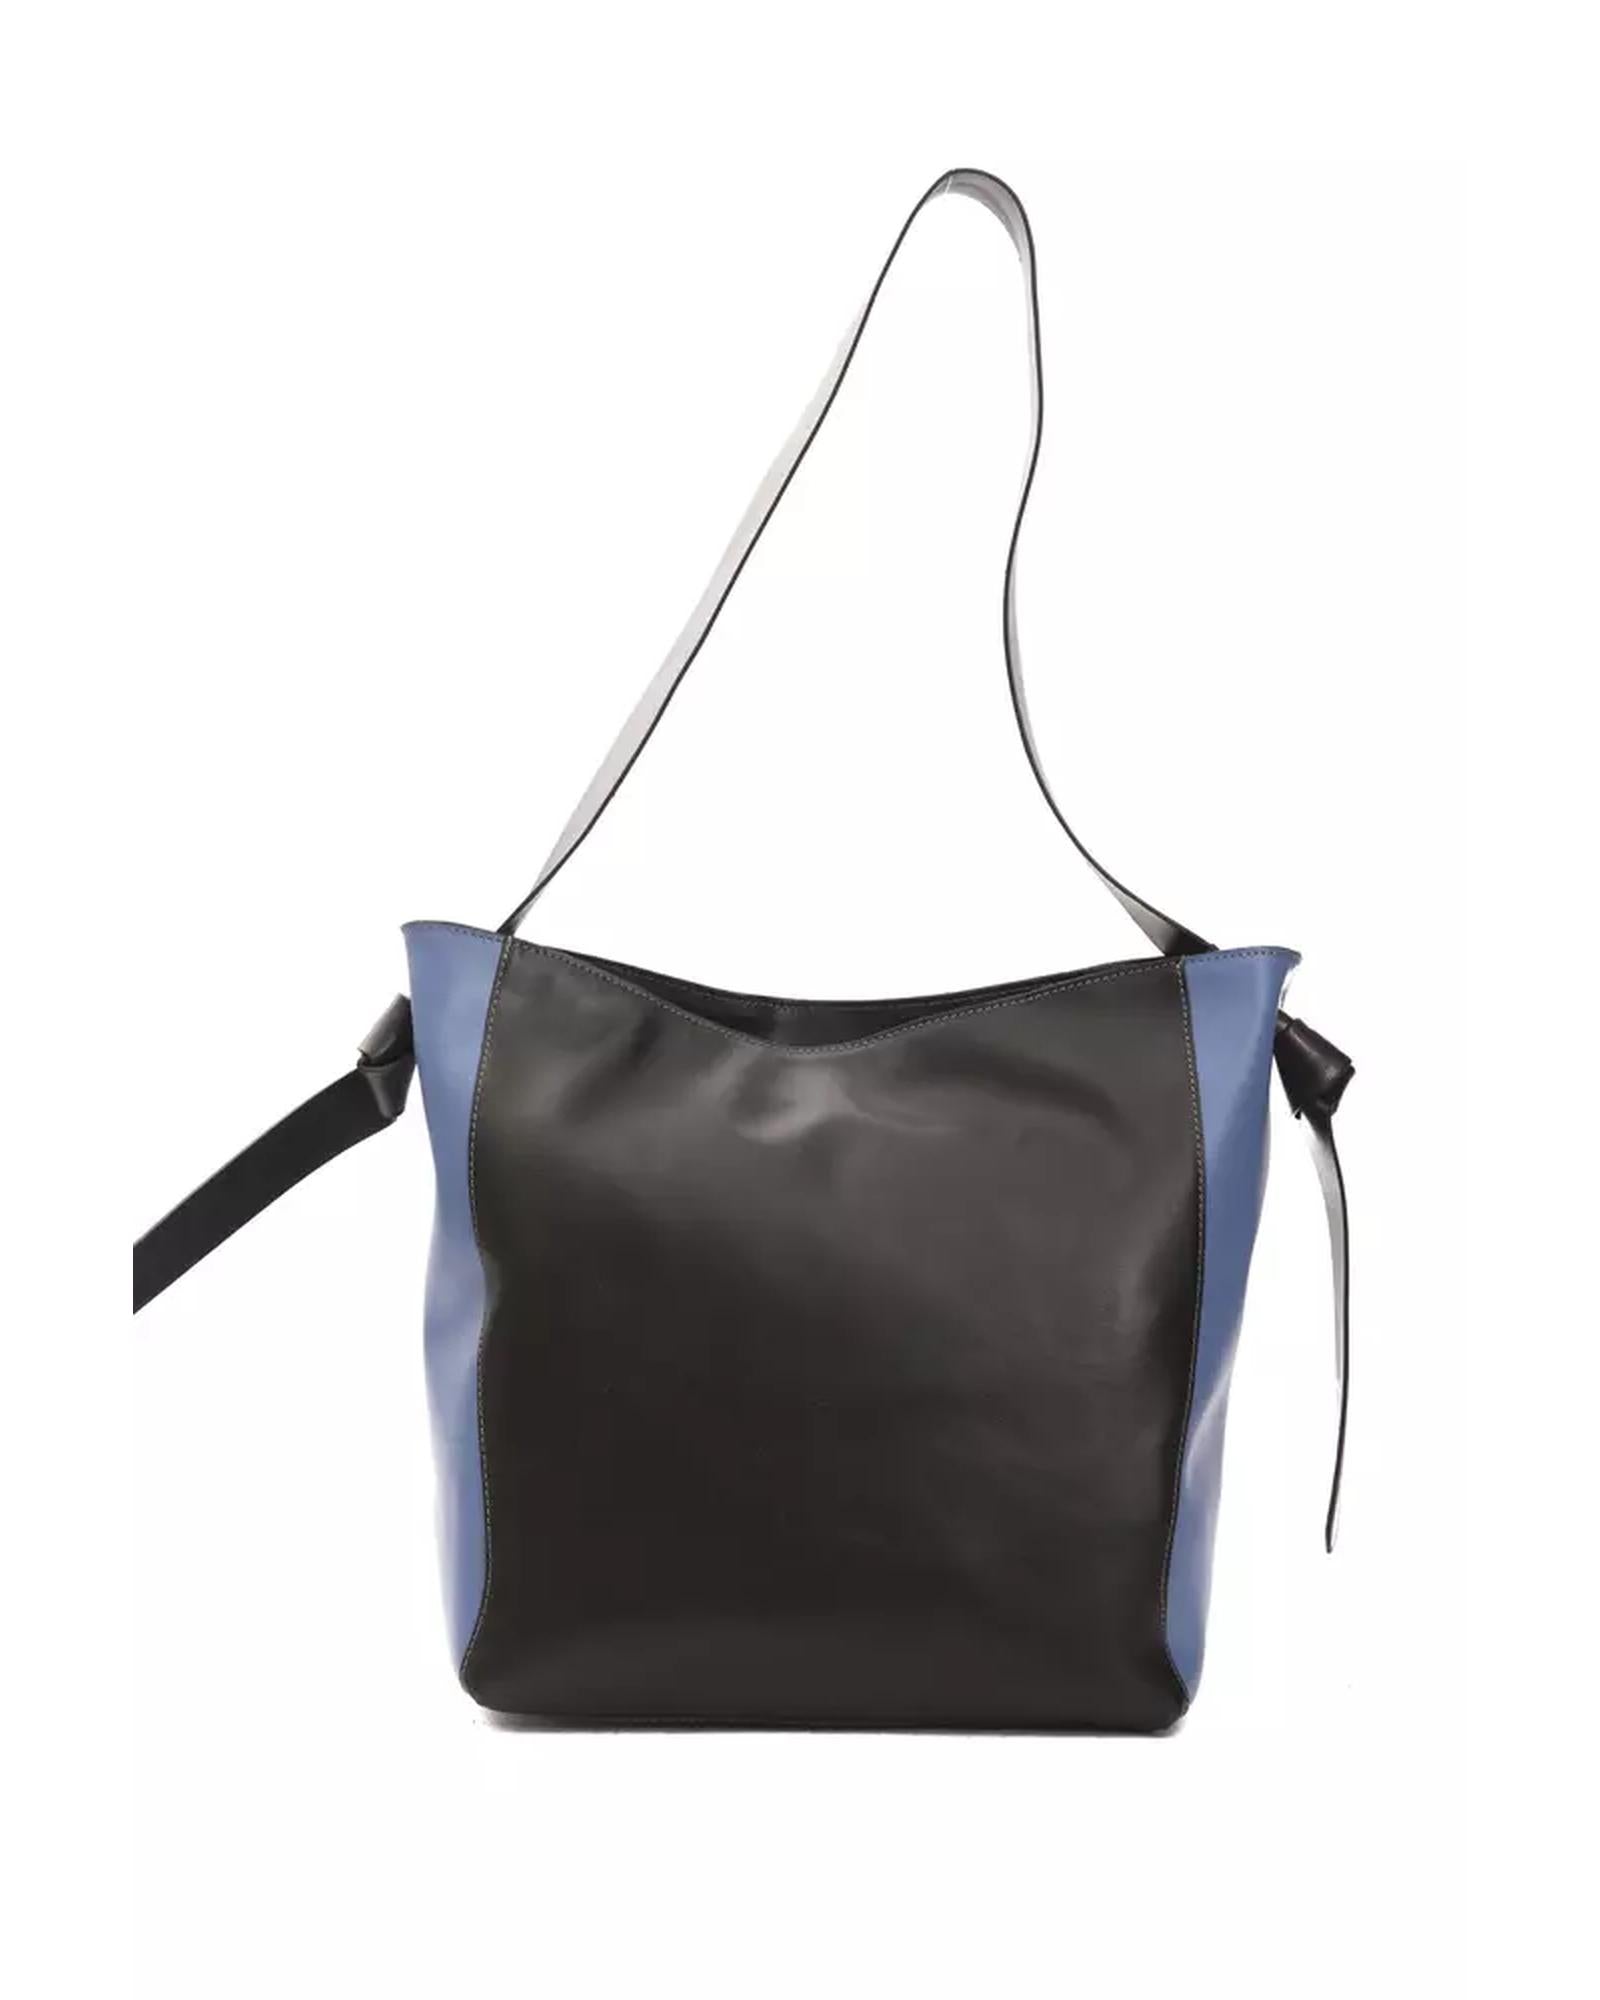 Adjustable Leather Shoulder Bag with Logo Detail and Dustbag Included One Size Women